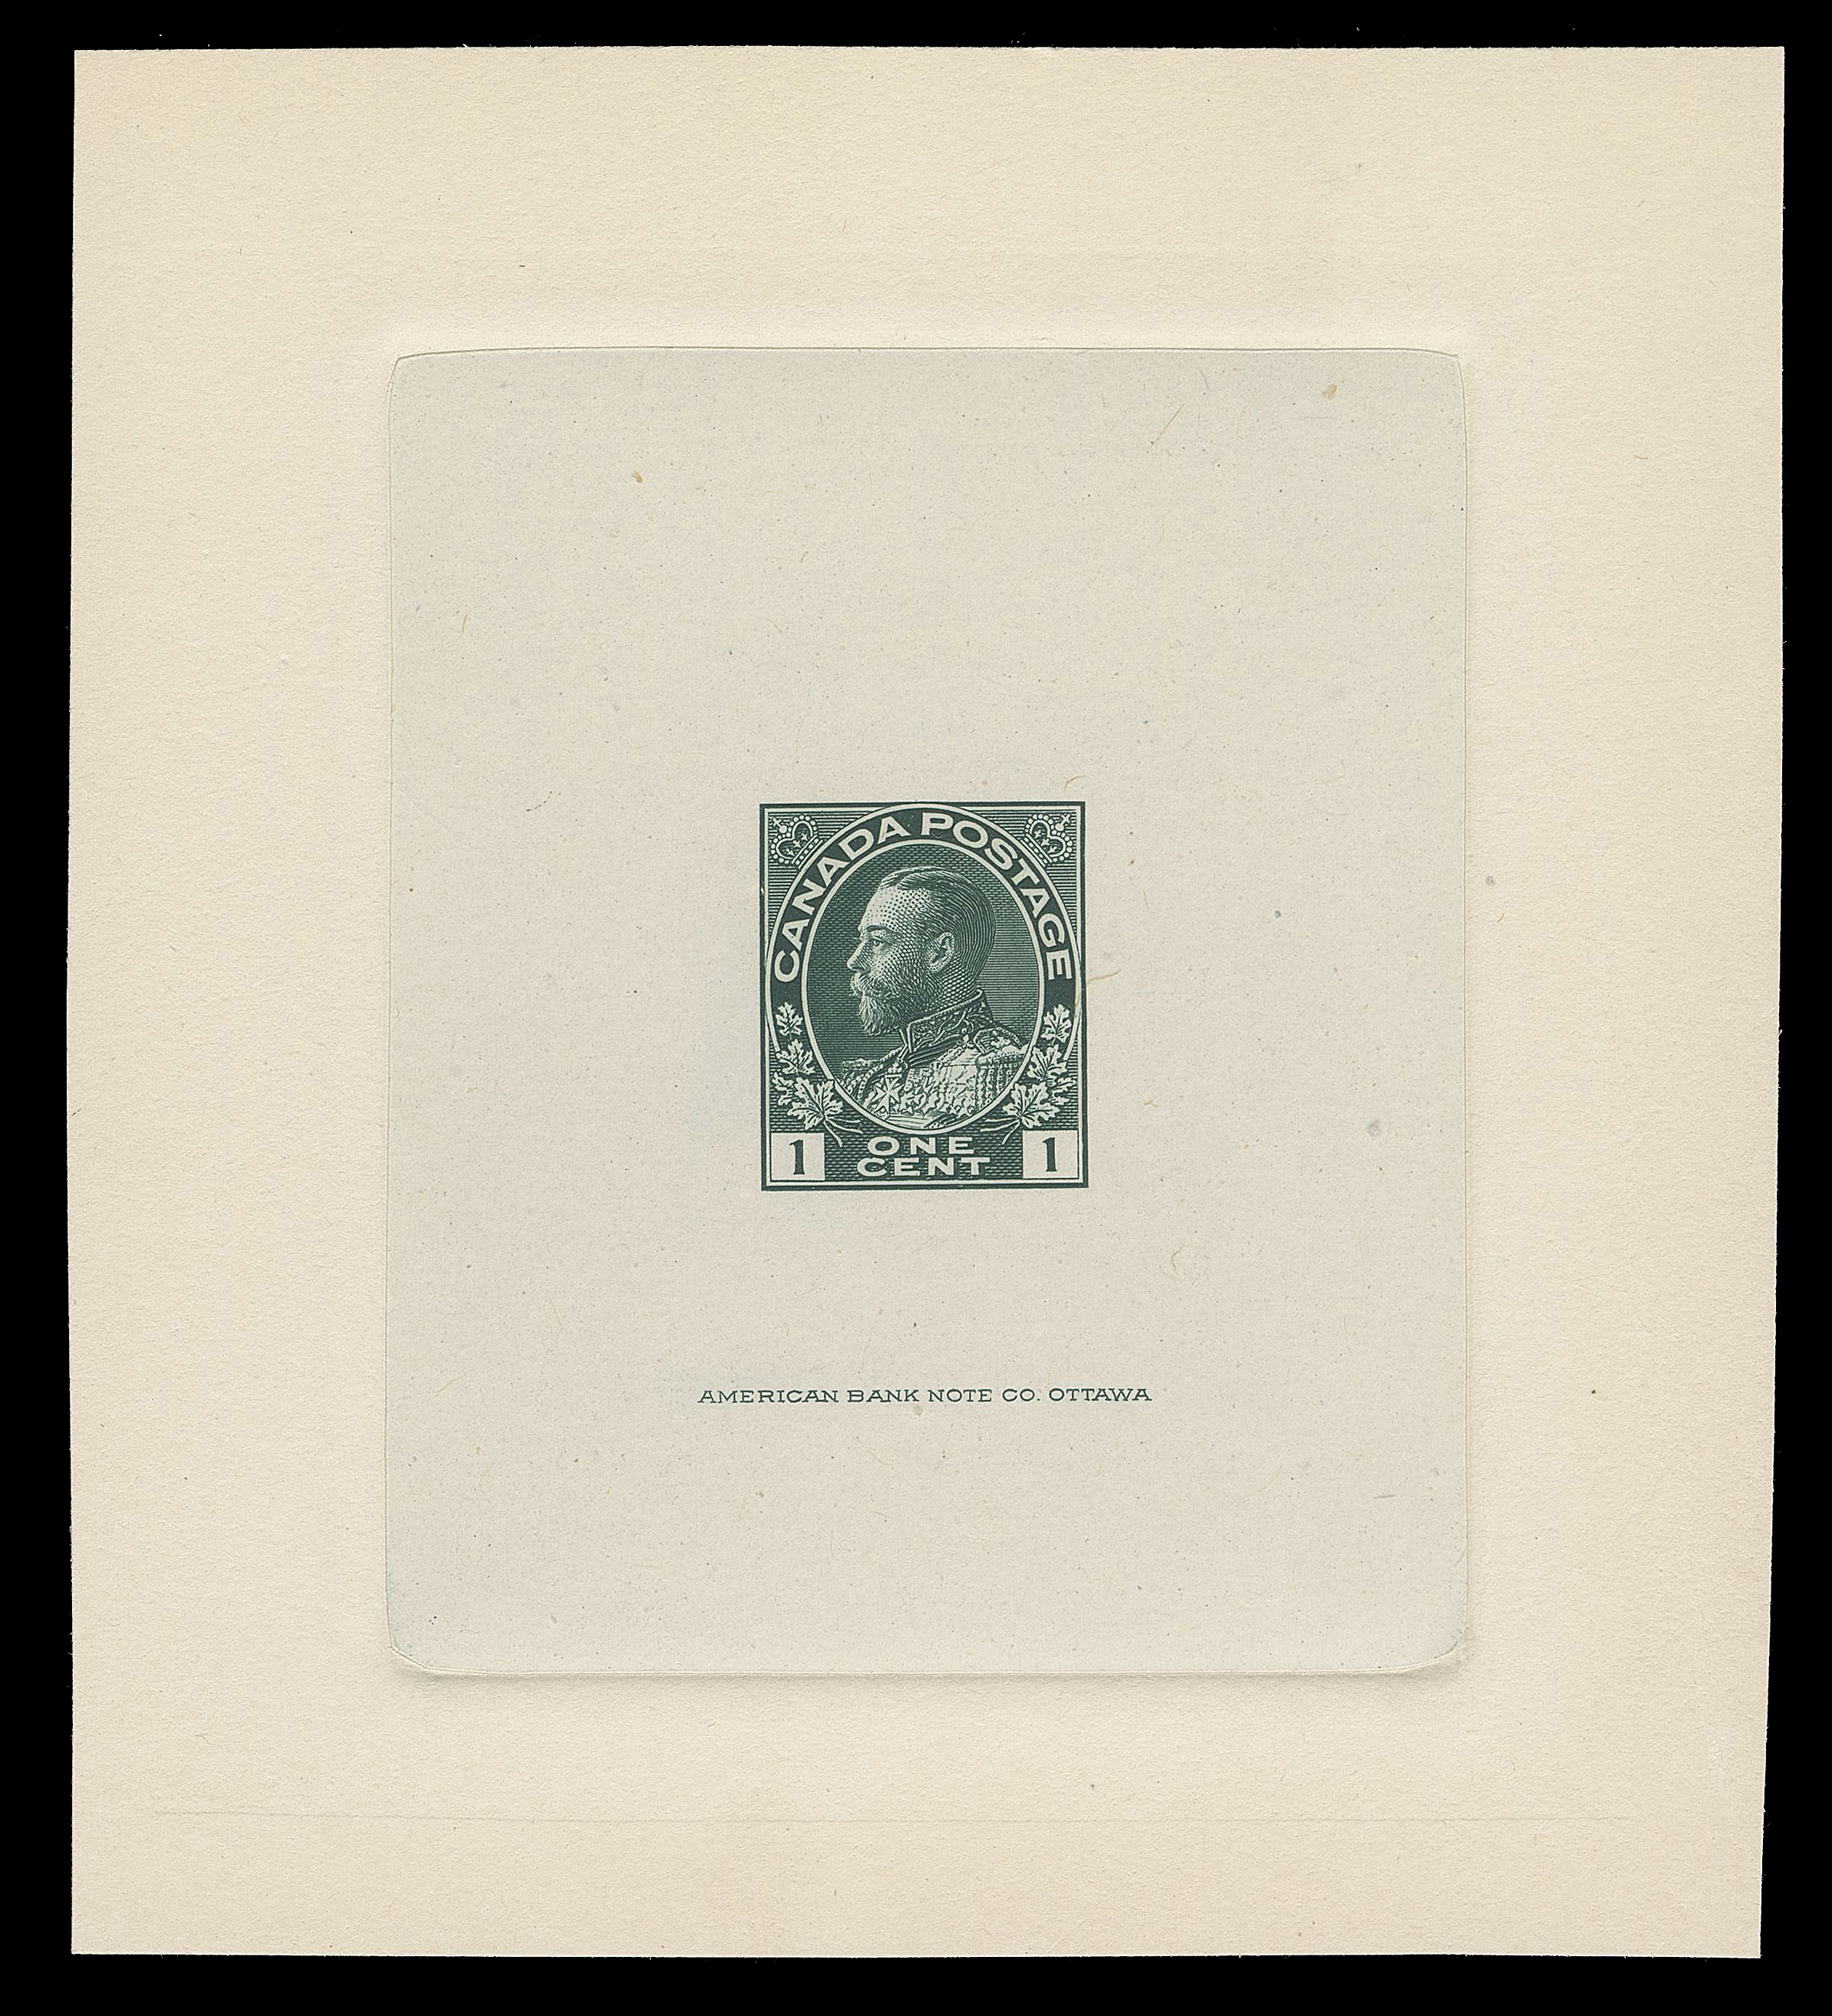 ADMIRAL PROOFS  104,Die Proof printed in the first printing colour, on india paper 60 x 73mm die sunk on large card 95 x 106mm, faint card crease at right away from die sinkage, no die number, with ABNC imprint (25mm long) below design, a superb unhardened die proof, rare and VF+ (Minuse & Pratt 104 B TC1a)